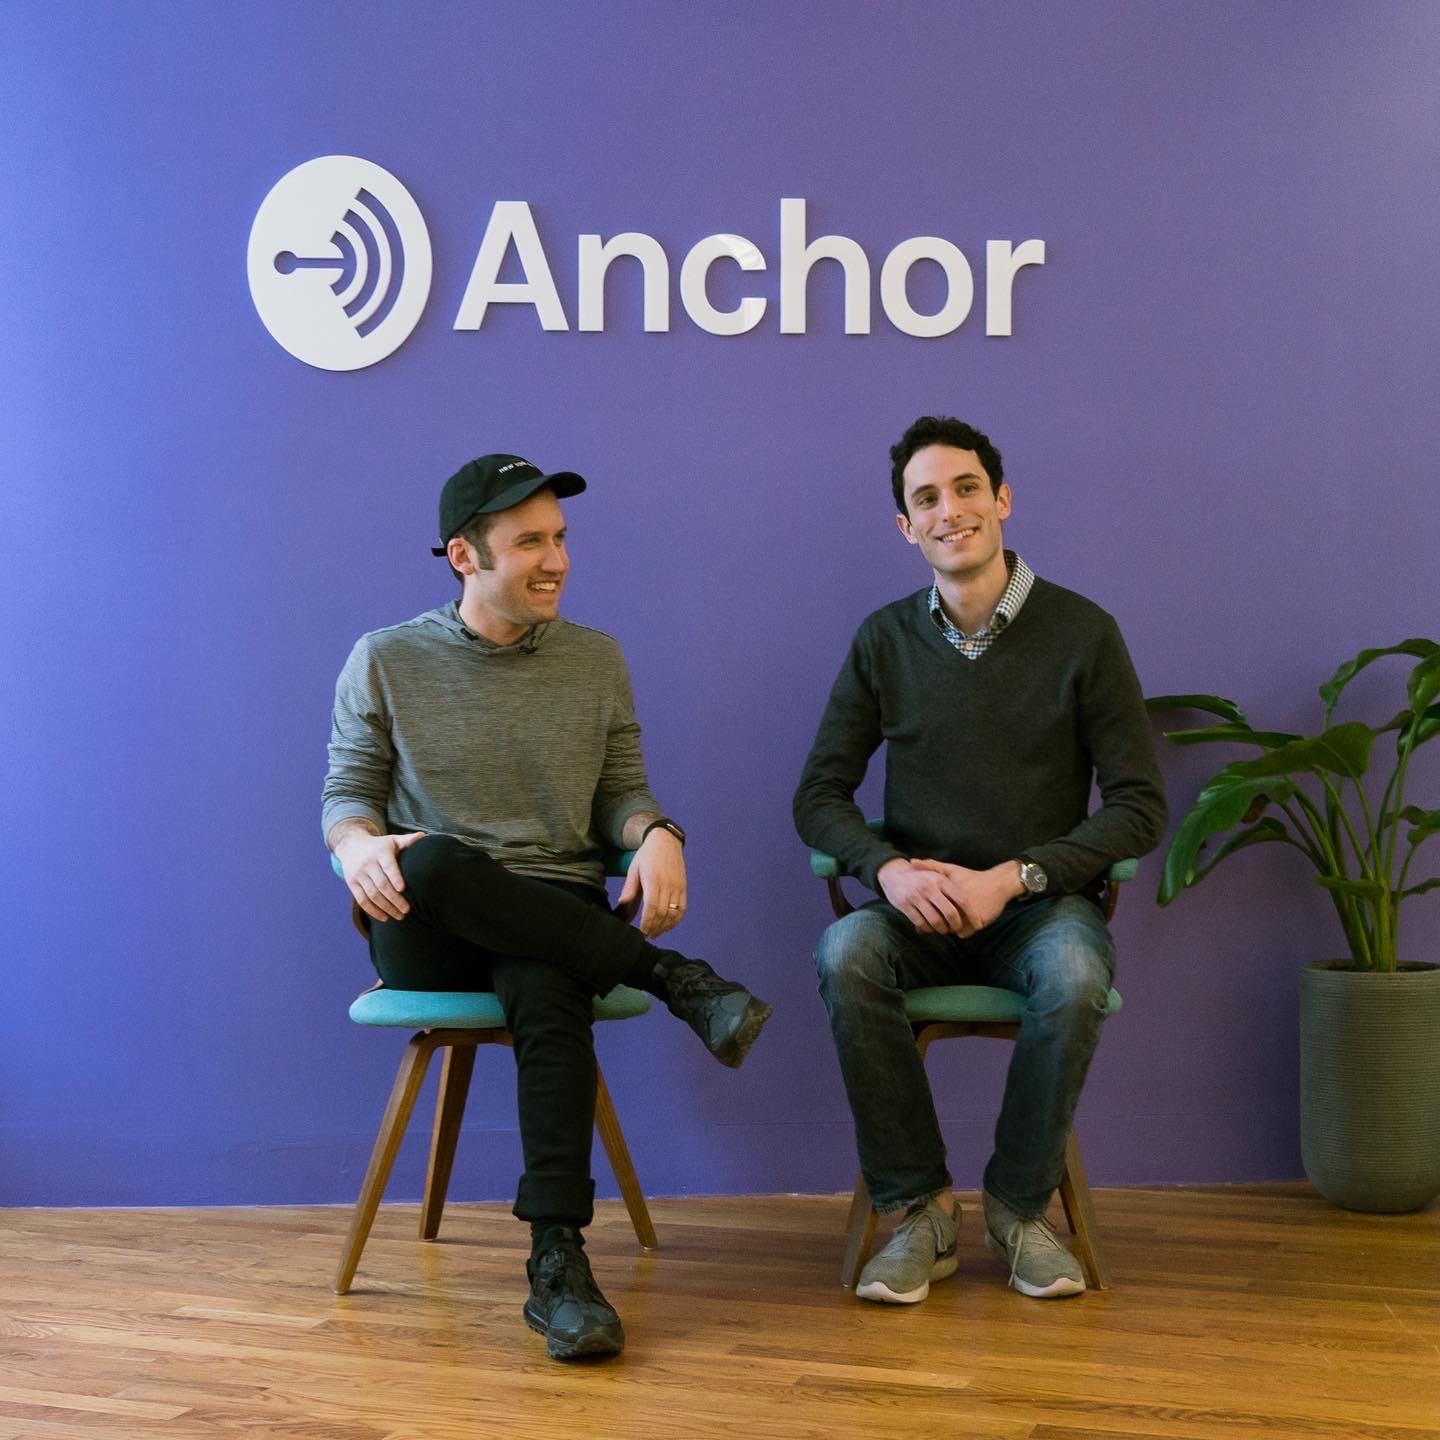 A photo of the co-founders of Anchor, the world's largest podcasting platform. On the left is Michael Mignano, CEO of Anchor, and on the right is Nir Zicherman, CTO of Anchor. The photo was taken sometime around 2018 in the former Anchor office before the company was acquired by Spotify.